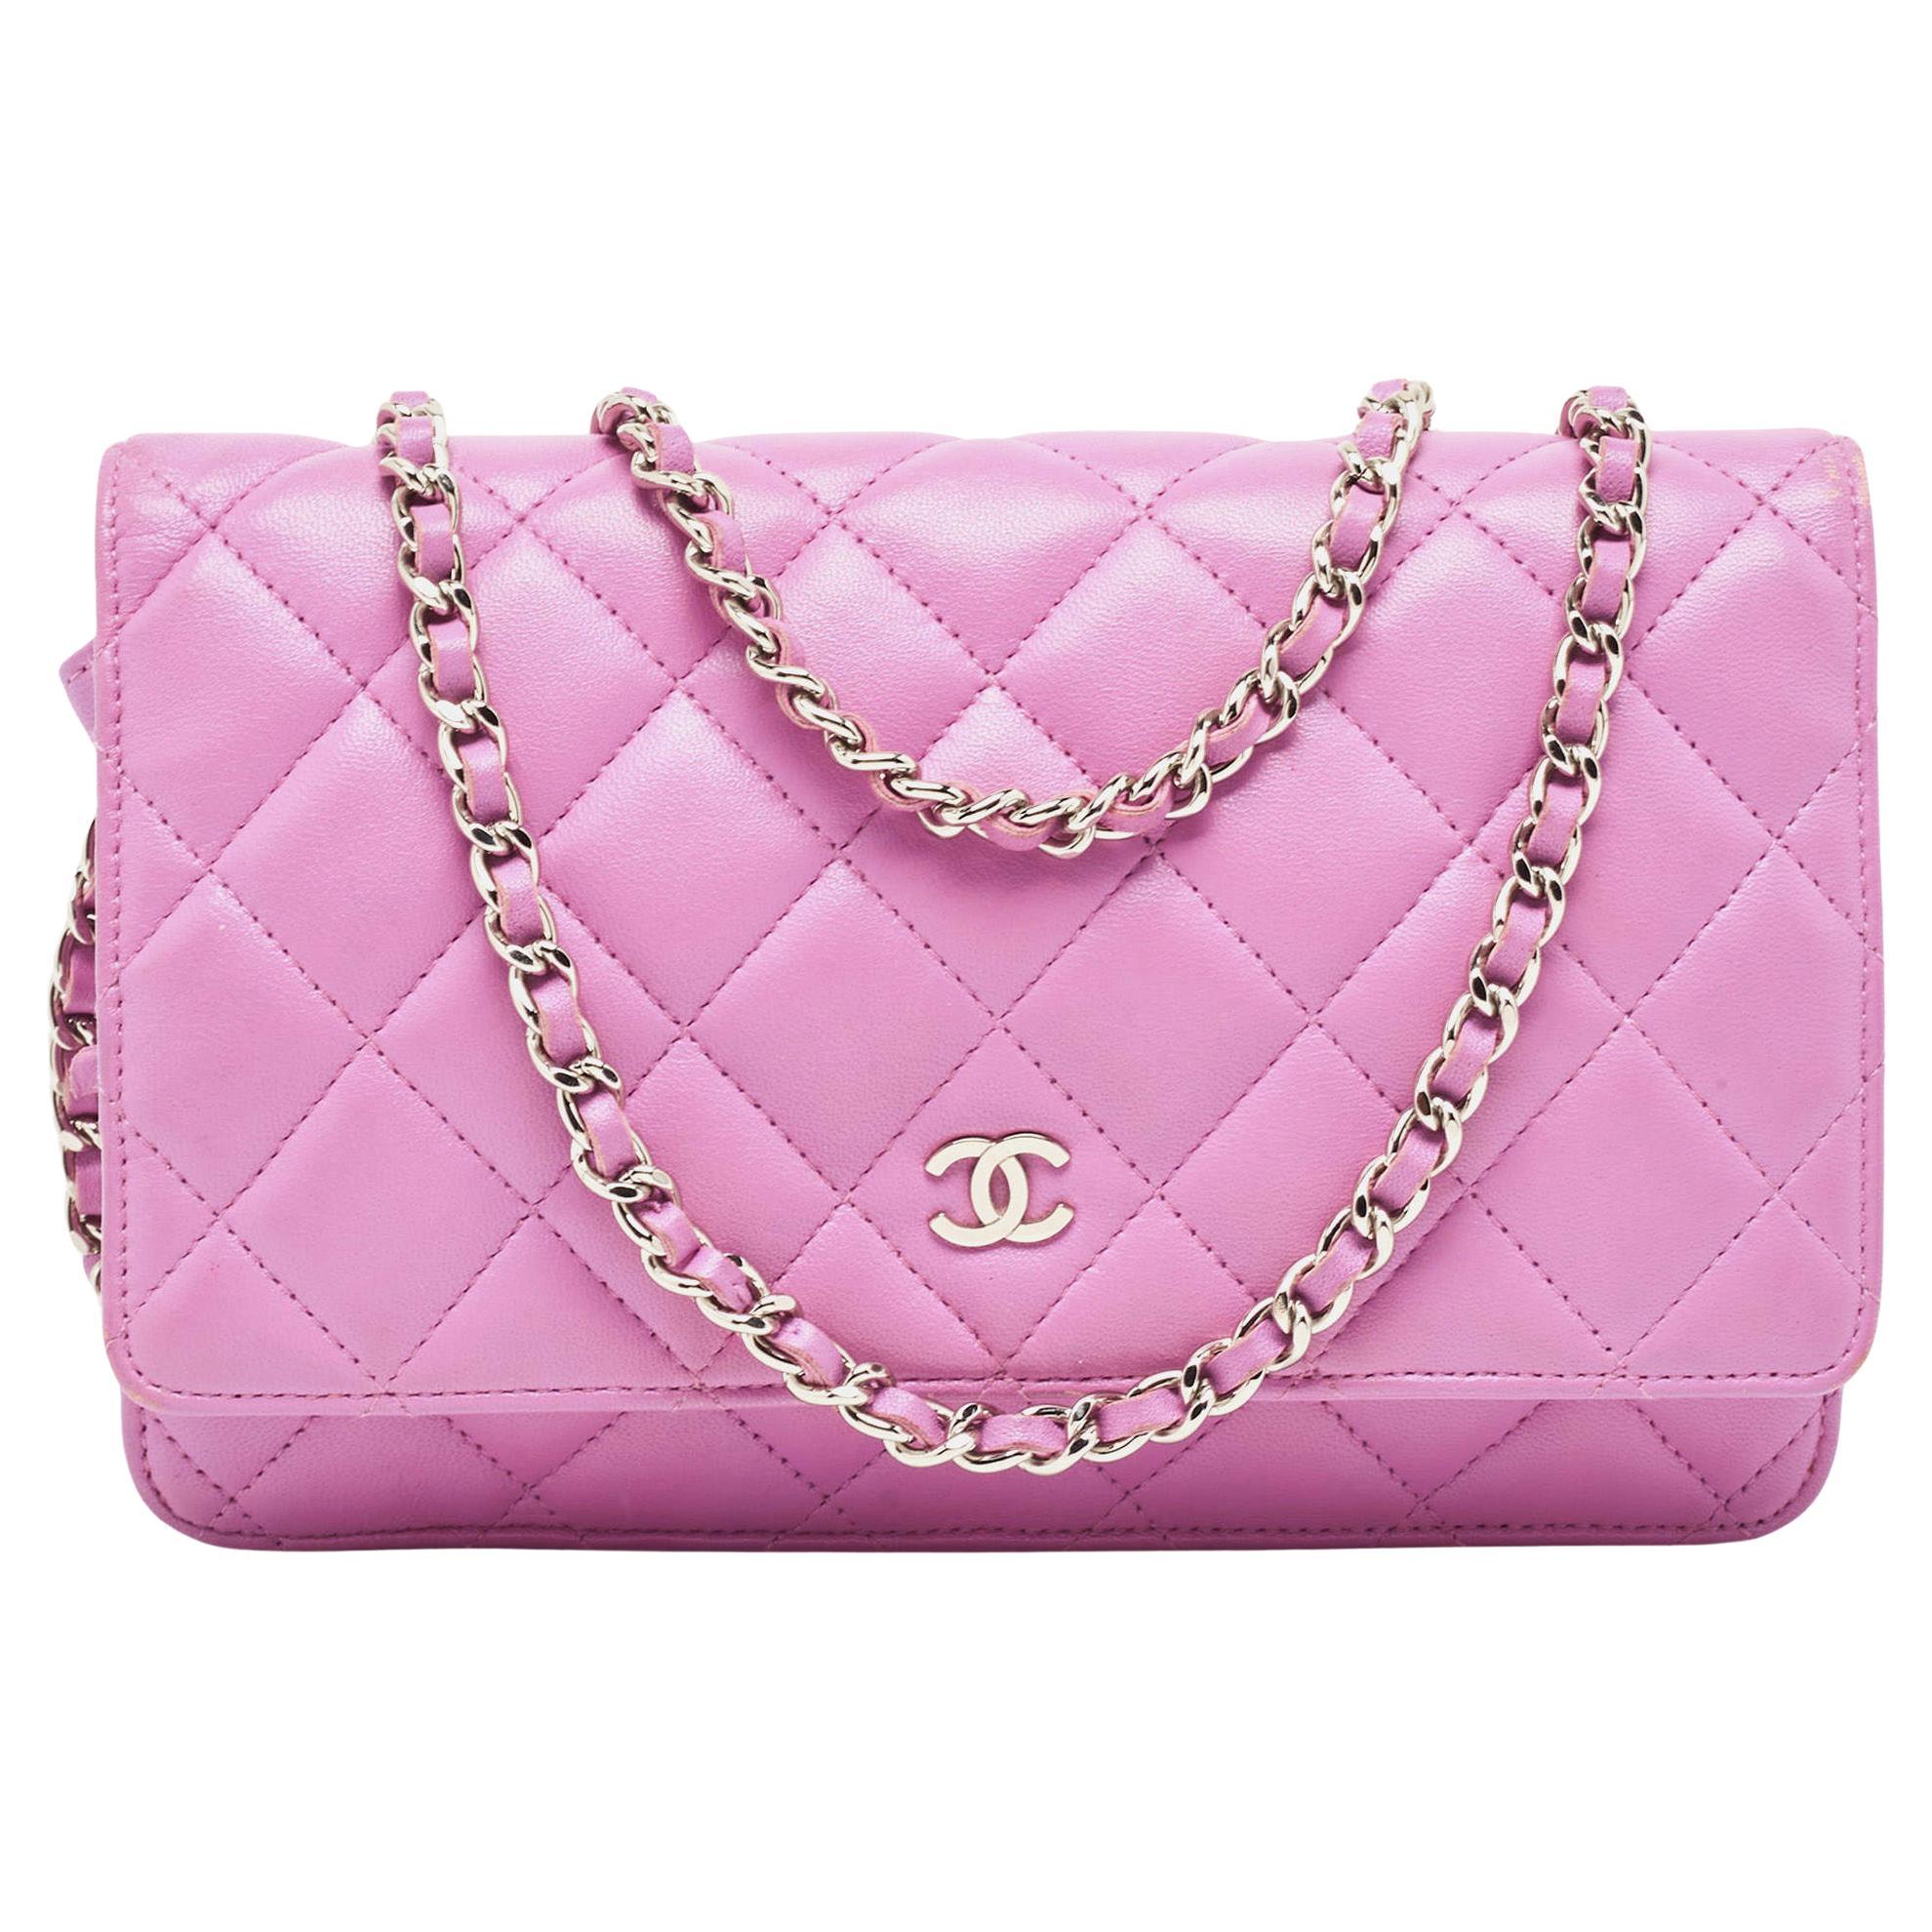 Chanel Purple Quilted Leather WOC Bag